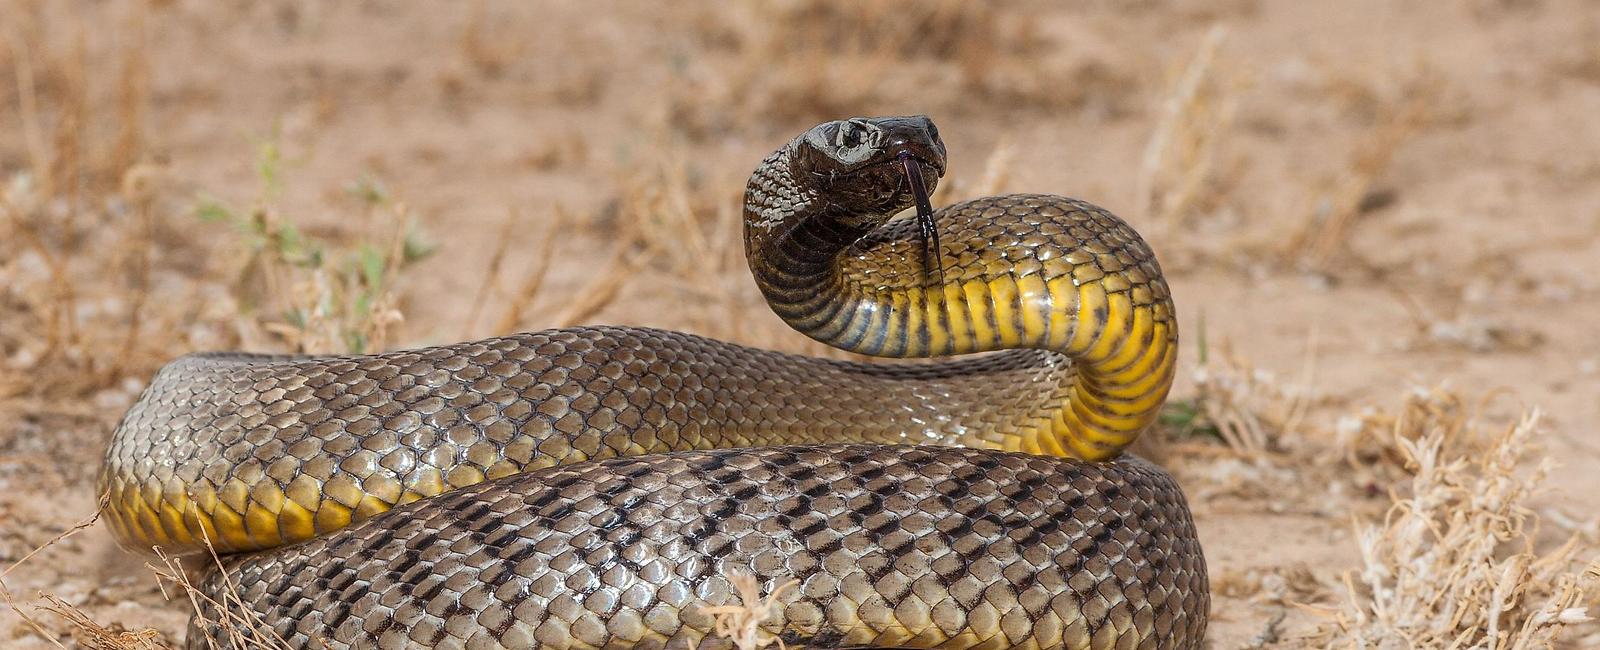 Central east australia s inland taipan could be the most venomous snake in the world when left untreated its bite can kill within only 30 minutes a single bite also has enough venom to kill up to 100 adult humans